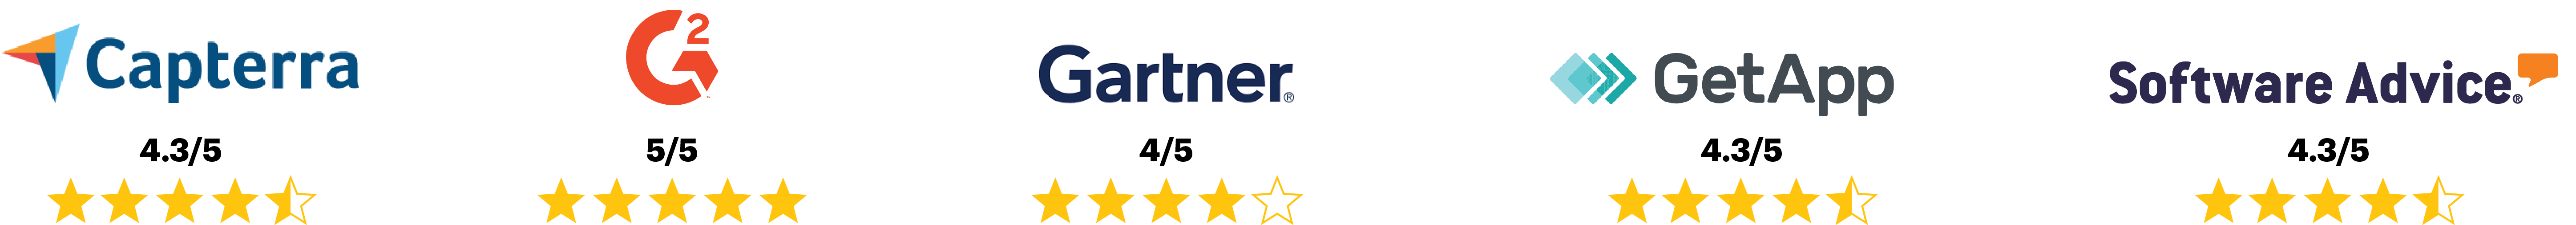 Capterra, G2, Gartner, GetApp, and Software Advice star ratings for HammerTech Construction Safety Software, ranging from 4-5 stars.